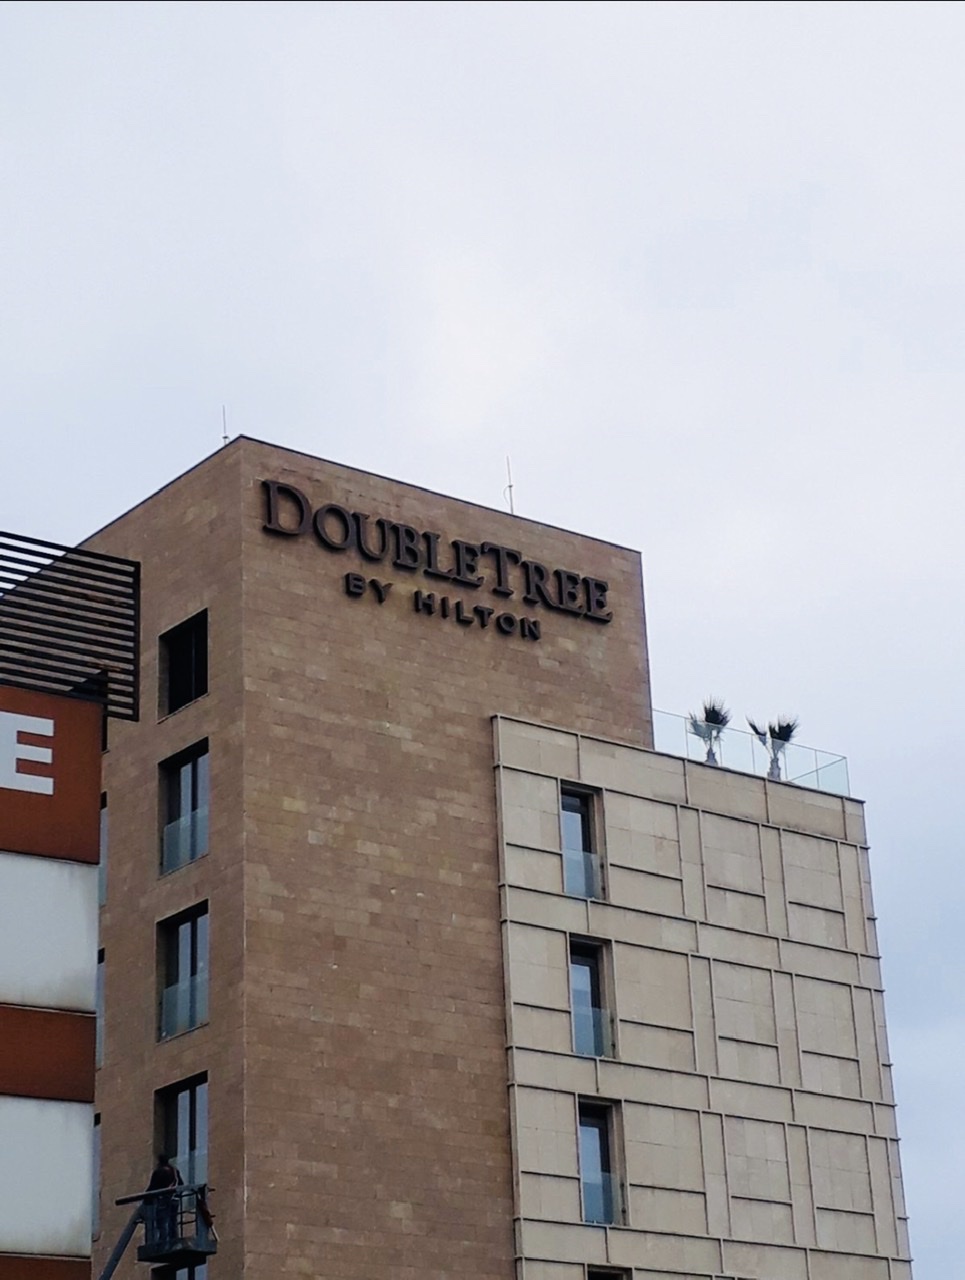 Double Tree by Hilton Trabzon